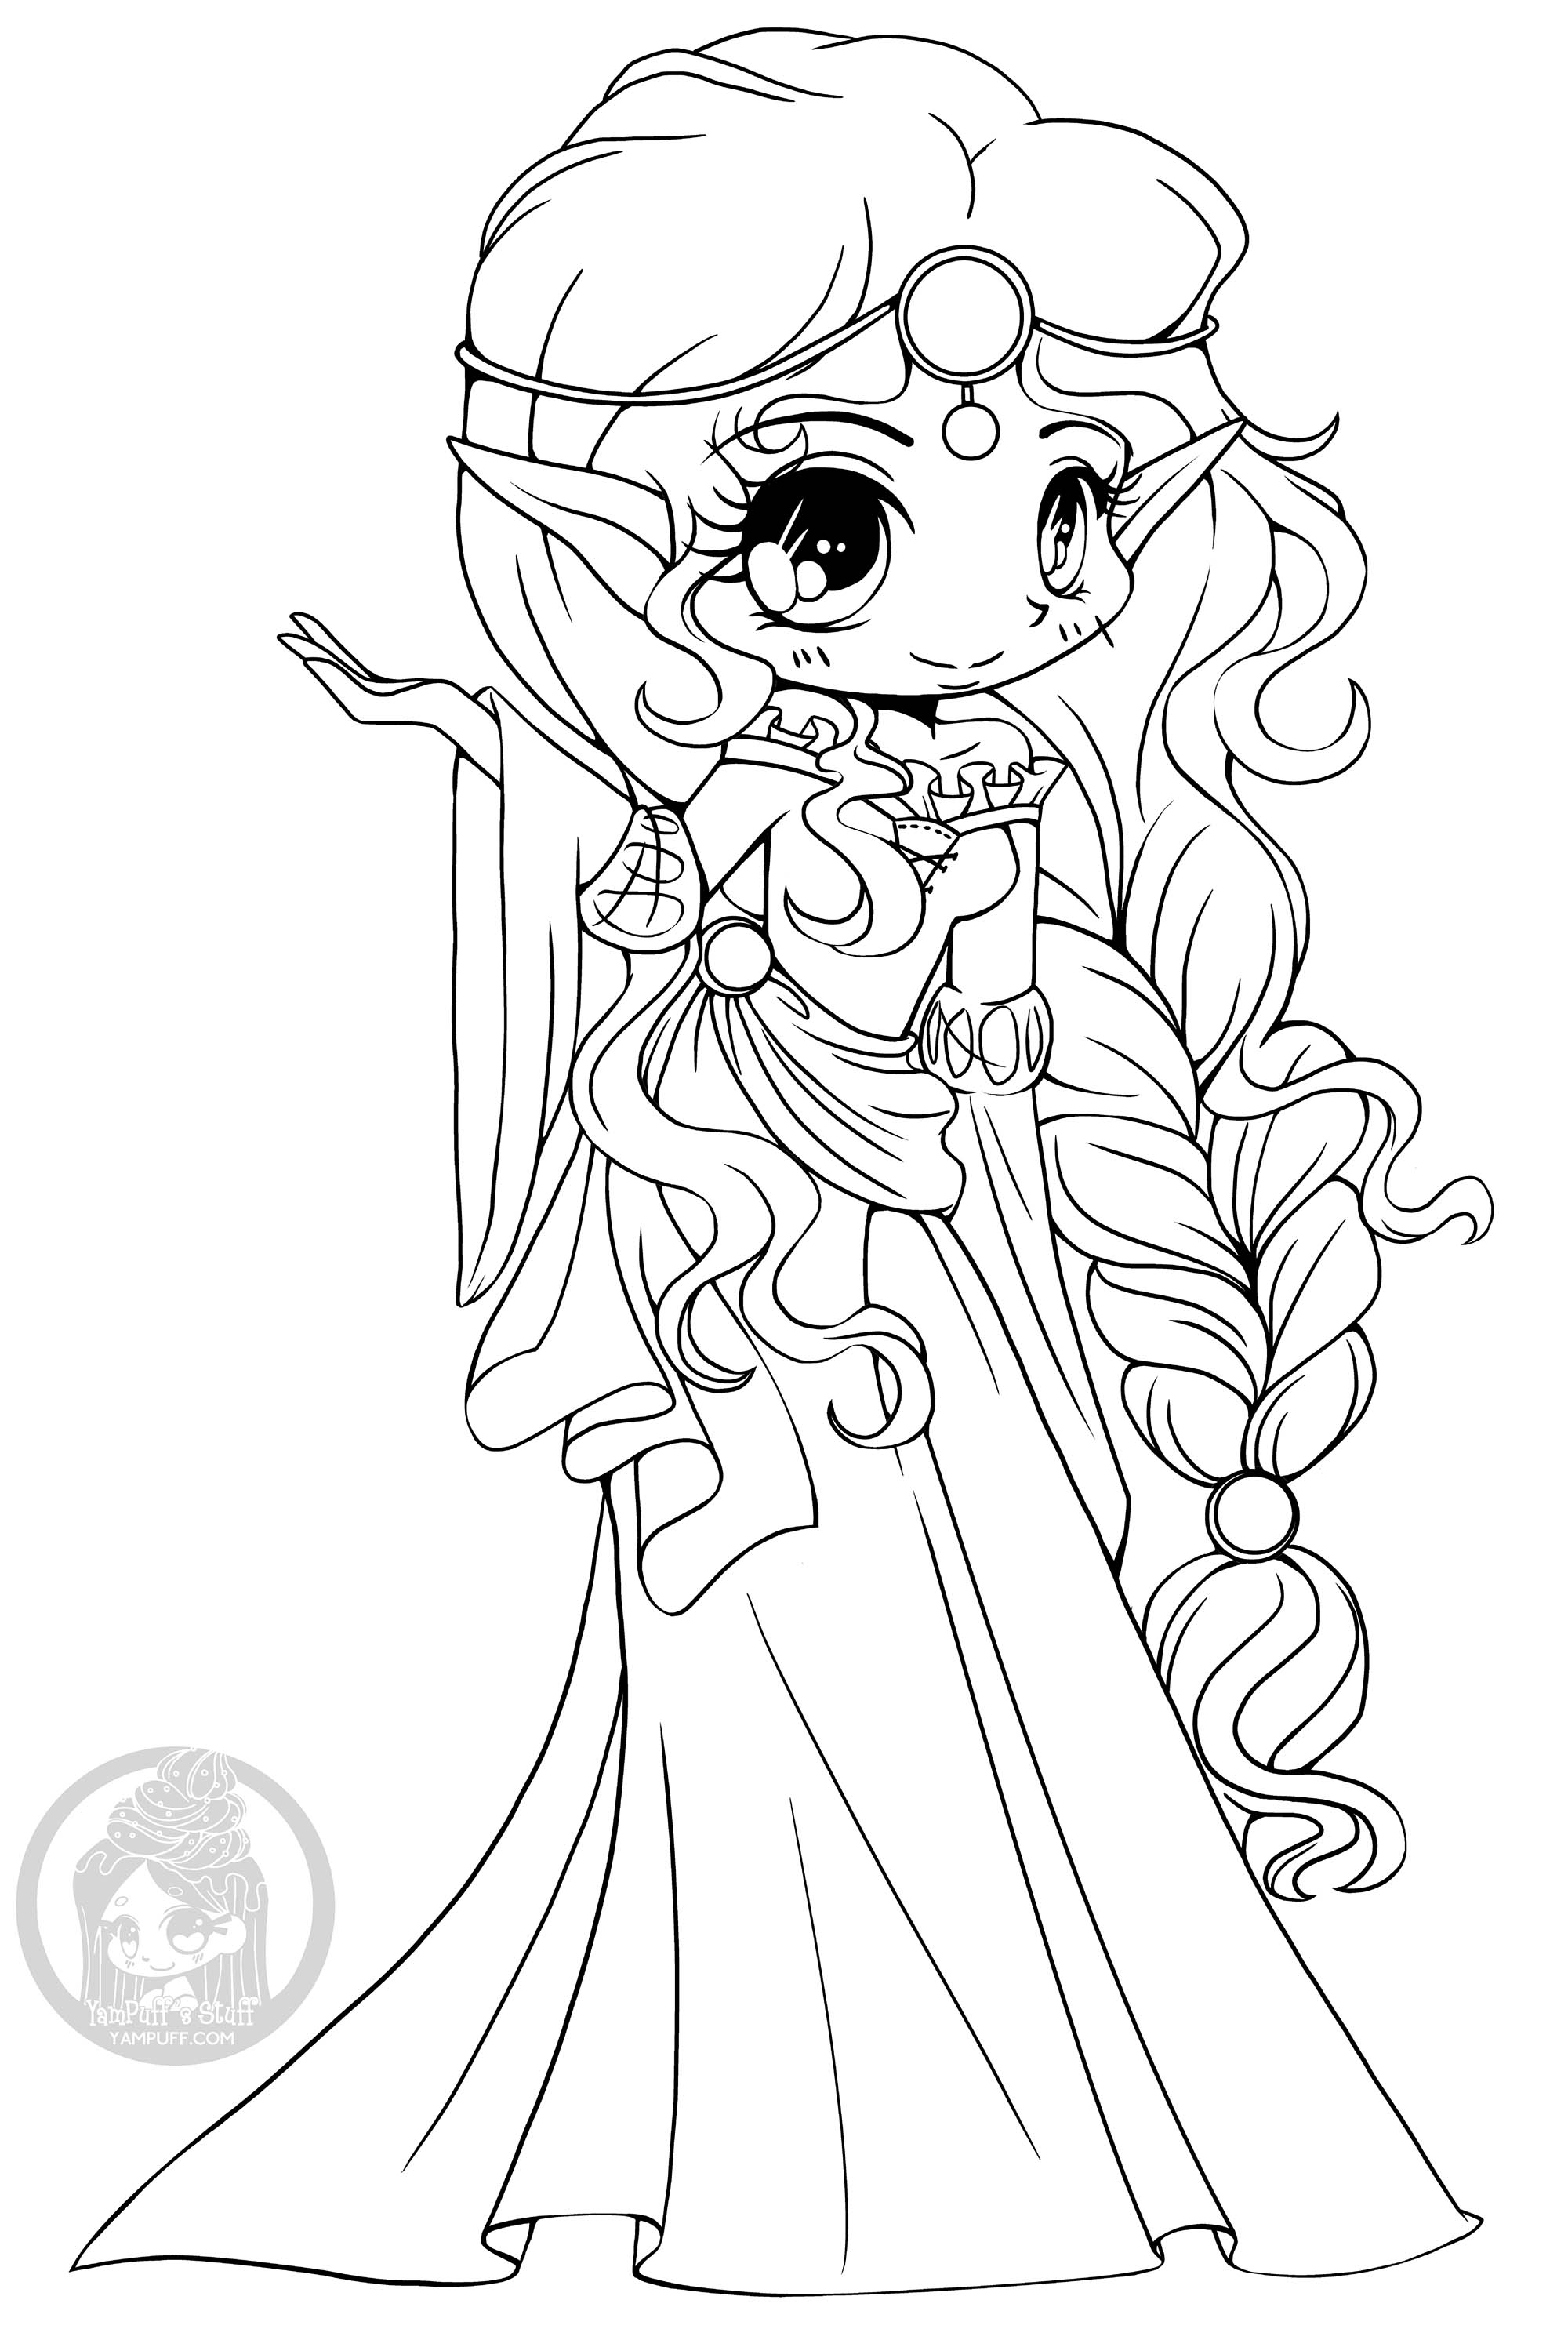 Chibi coloring pages